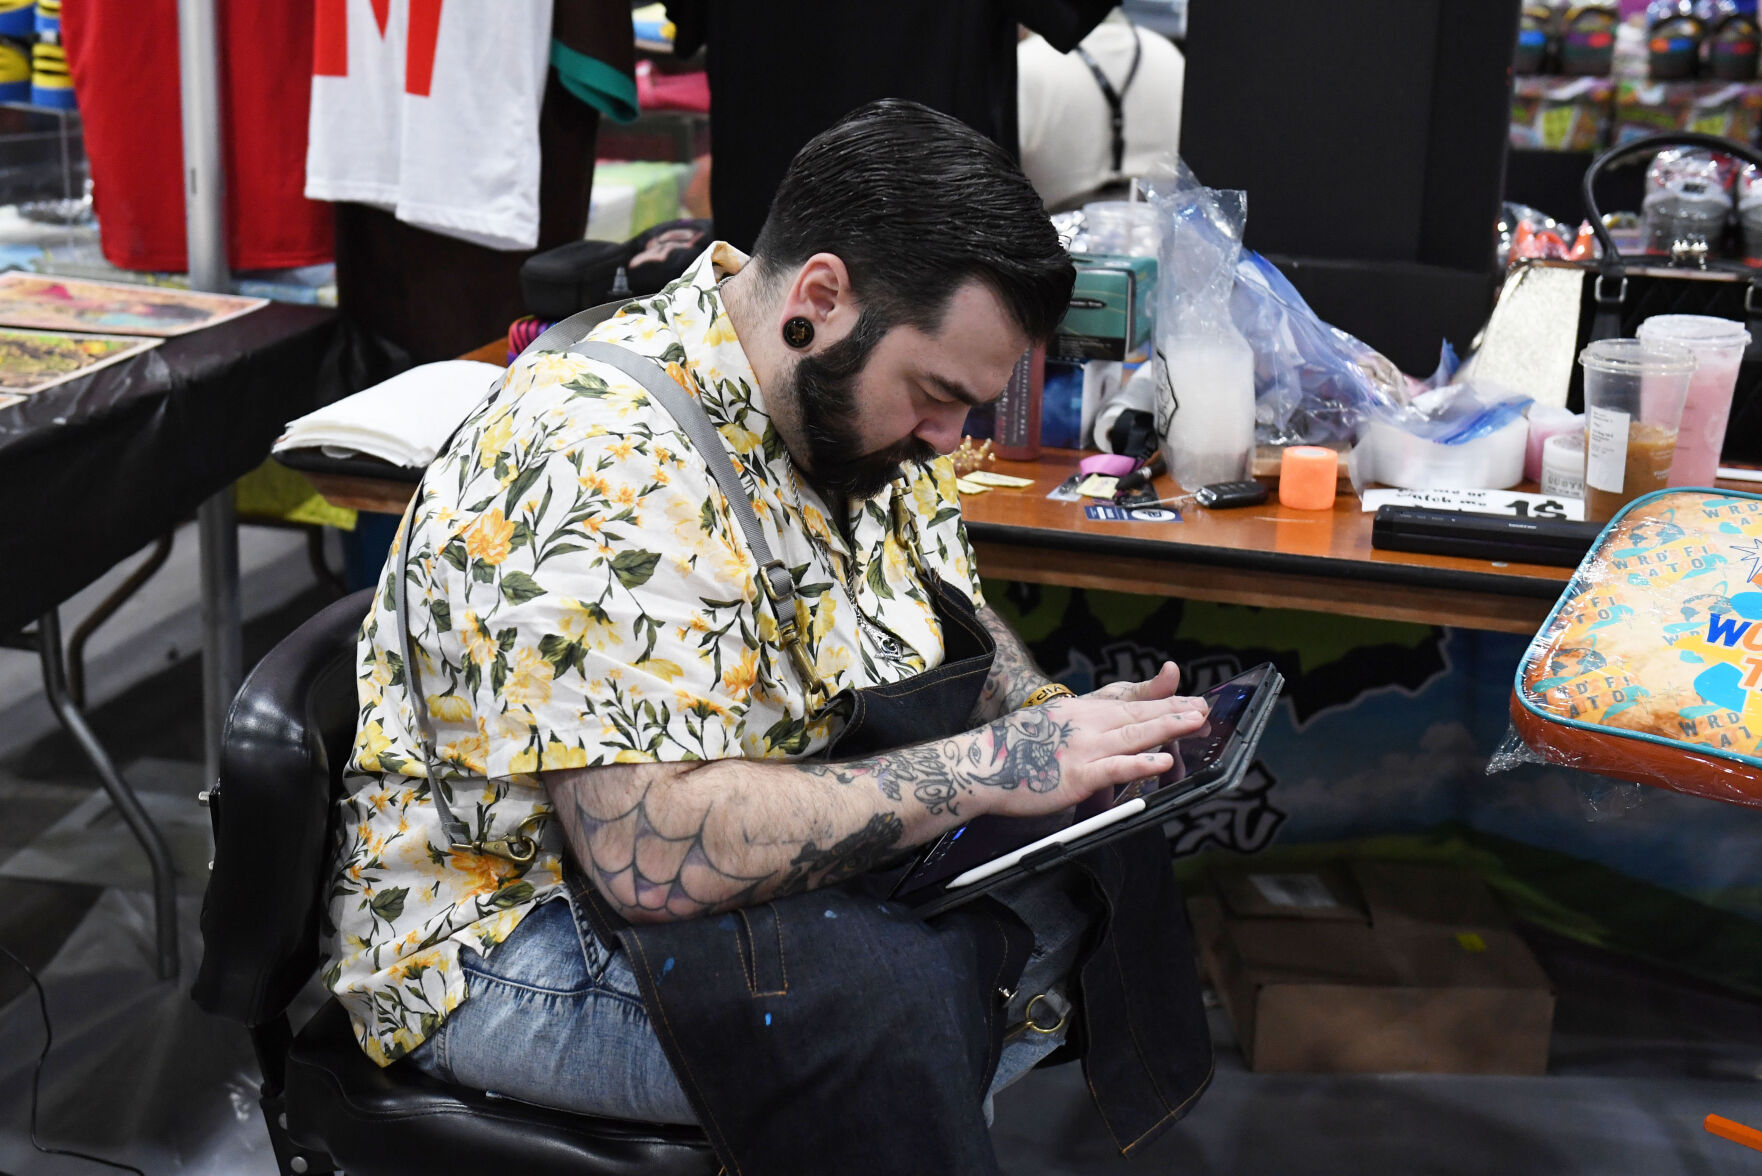 West Texas Tattoo Convention attracts top talent to San Angelo